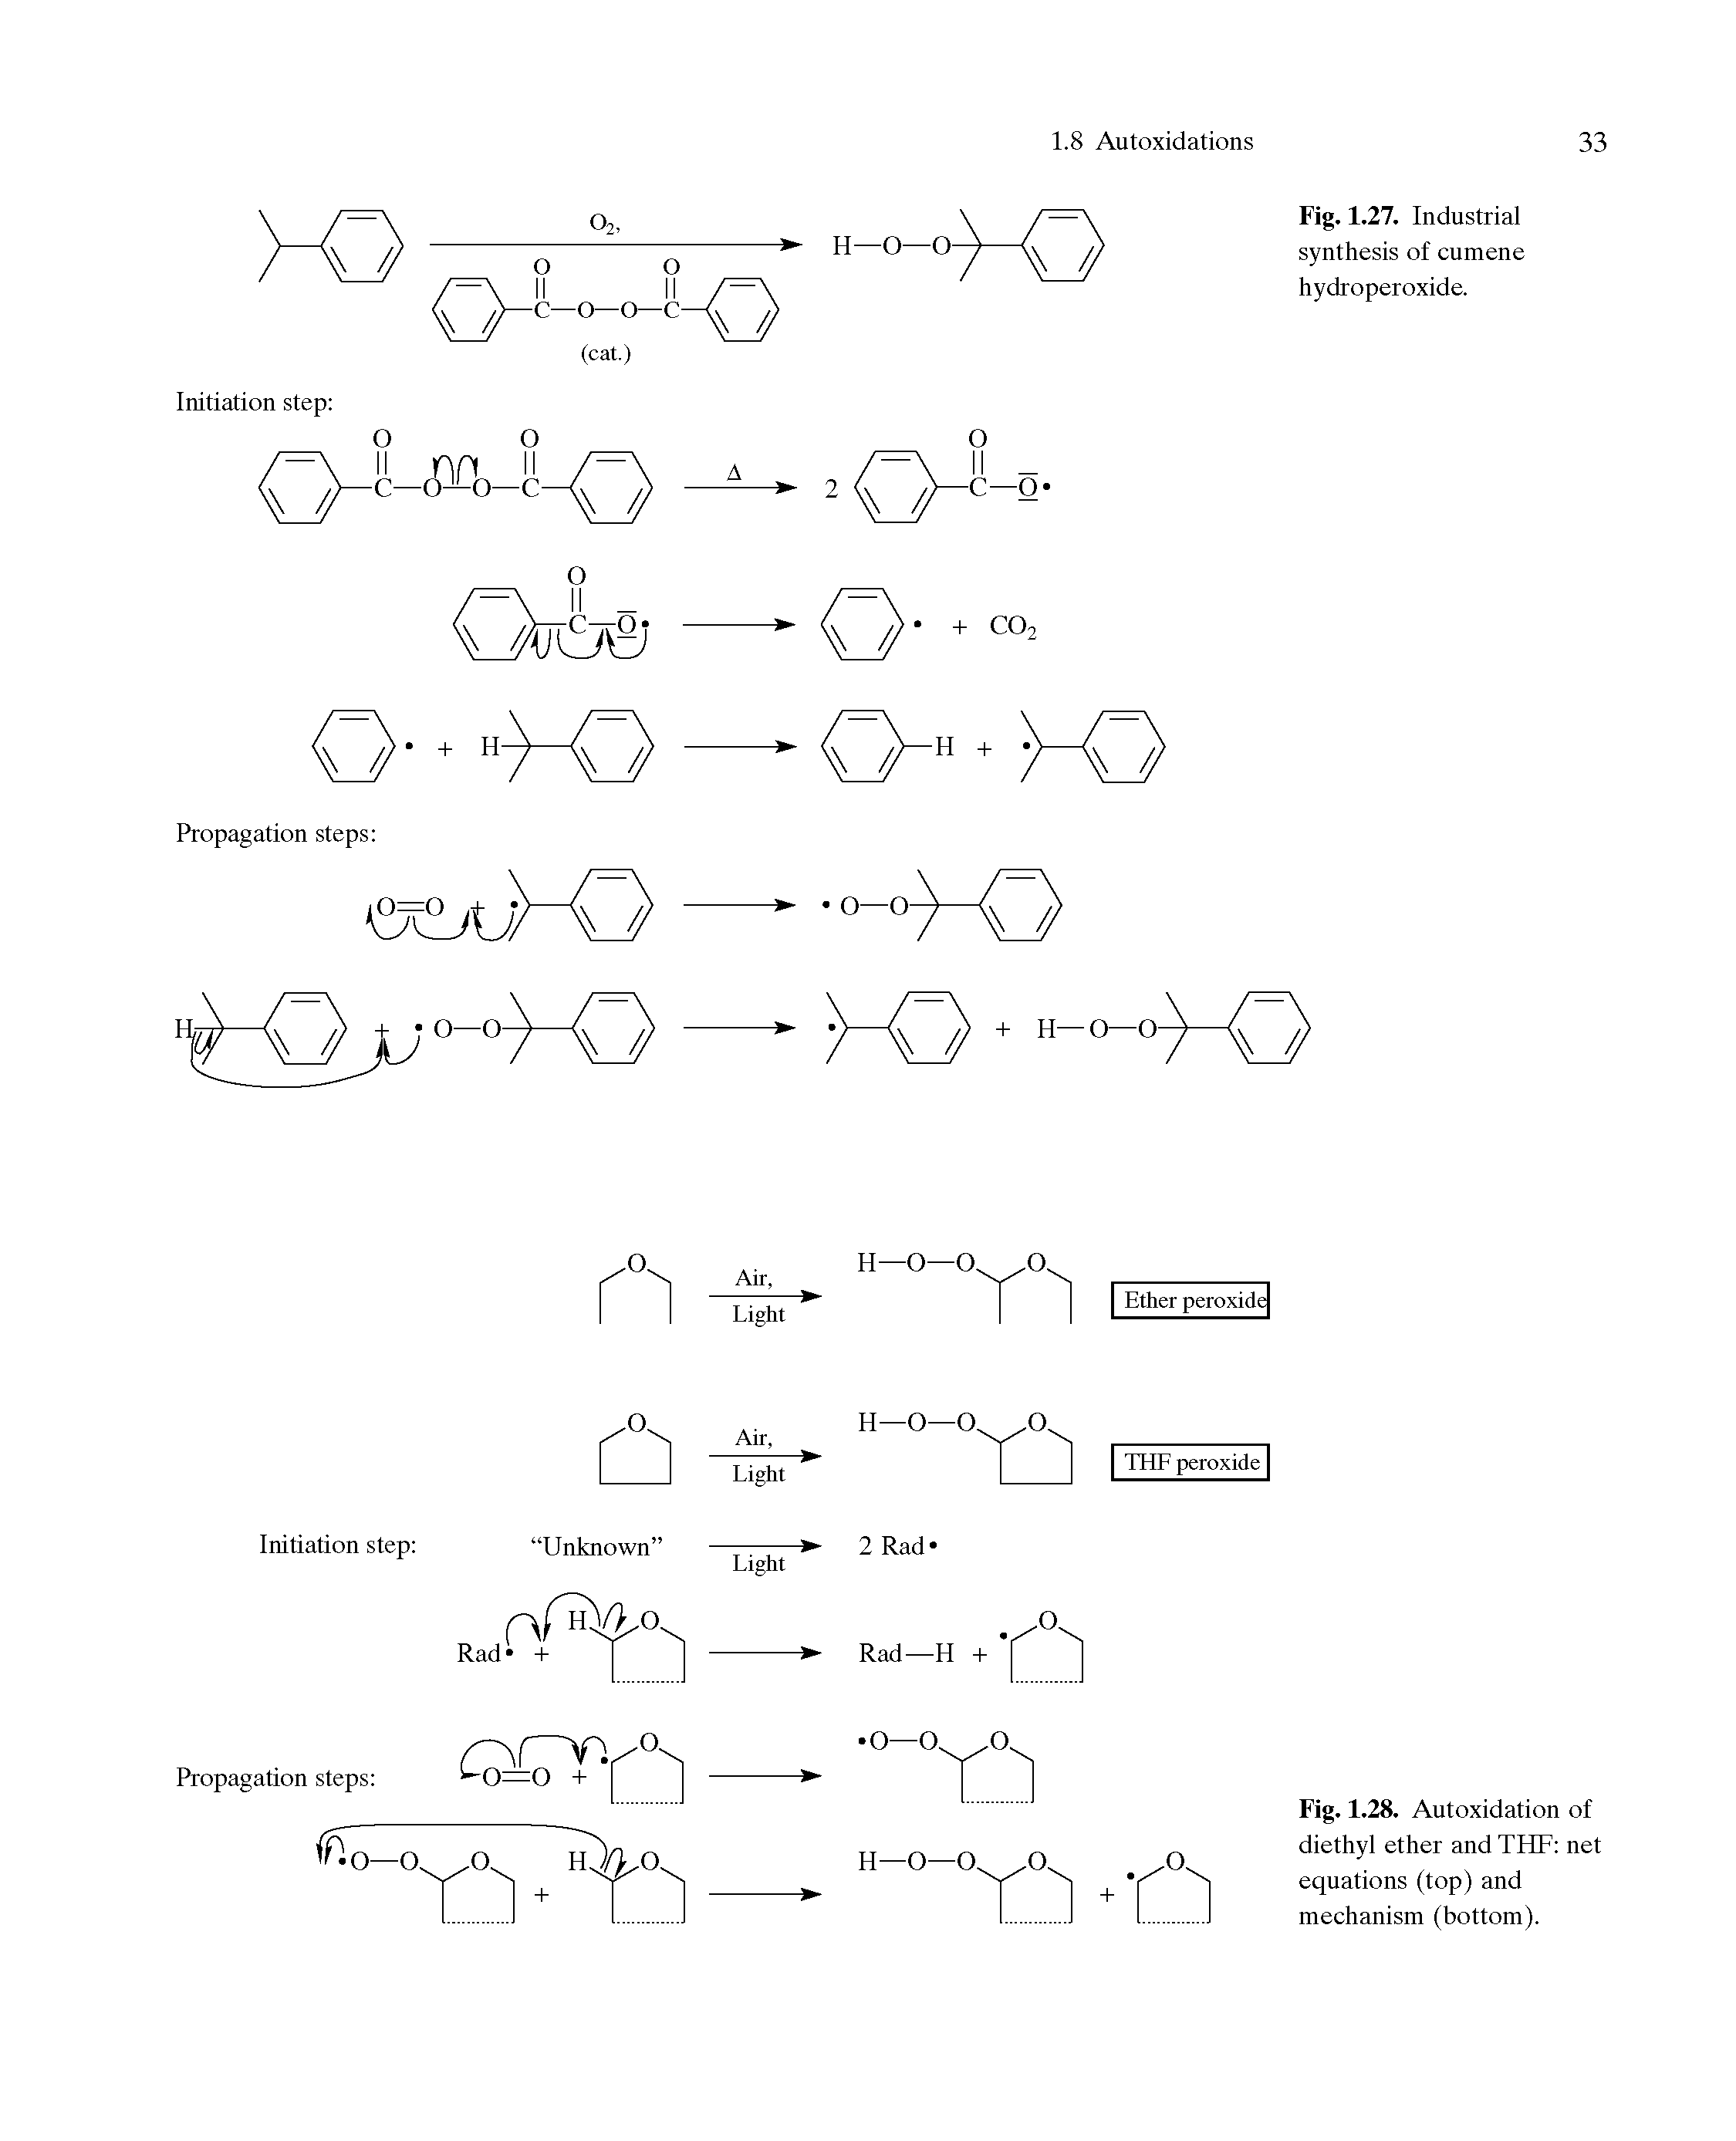 Fig. 1.28. Autoxidation of diethyl ether and THF net equations (top) and mechanism (bottom).